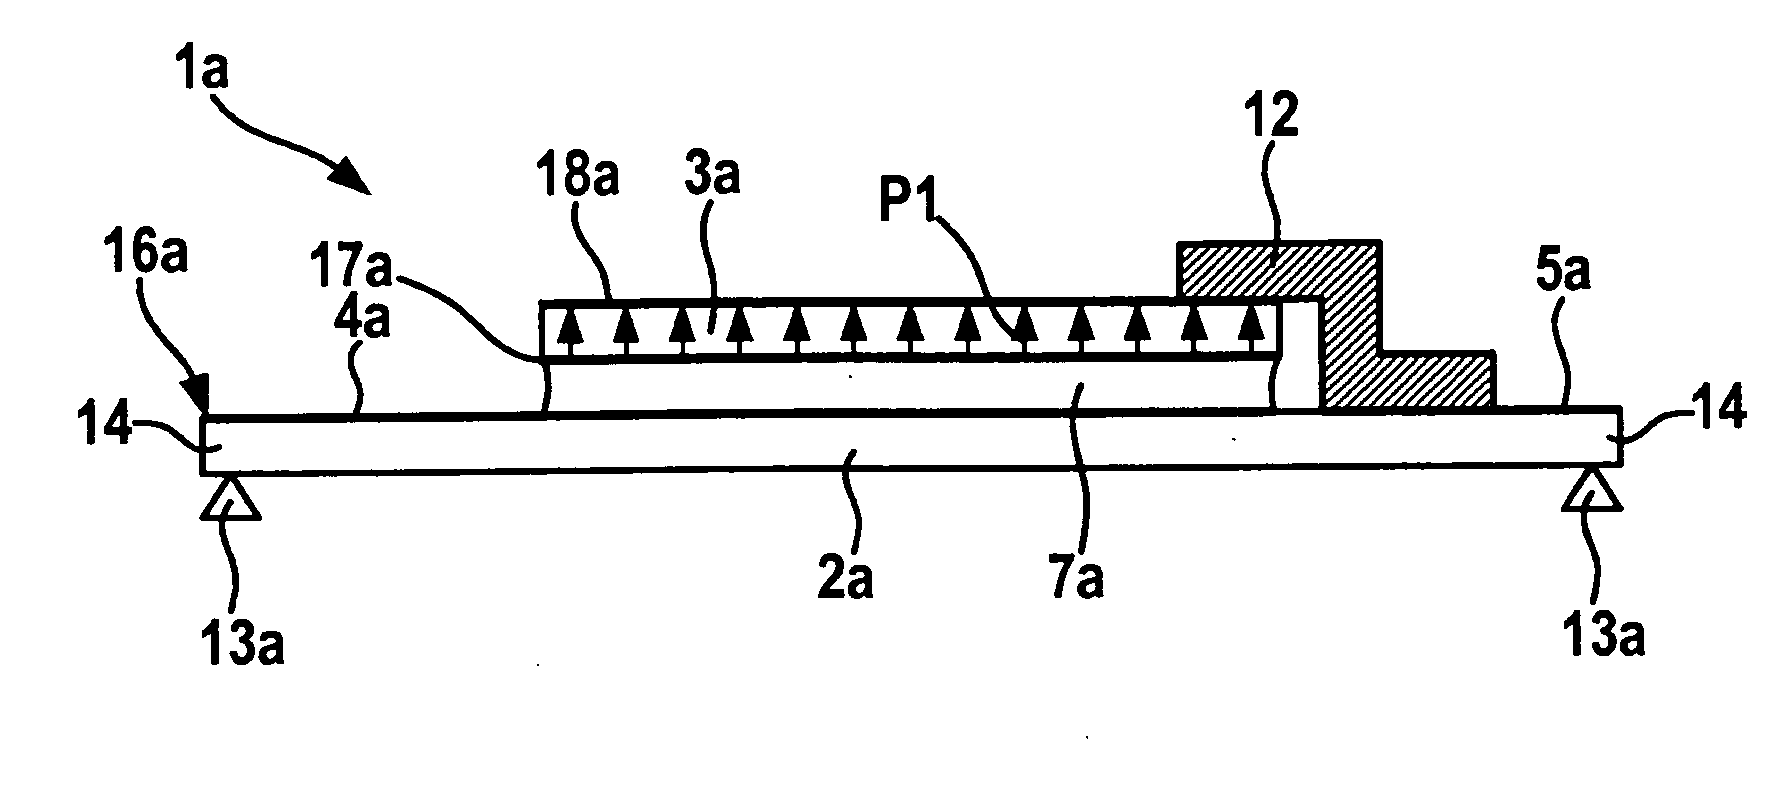 Bending transducer for generating electrical energy from mechanical deformations